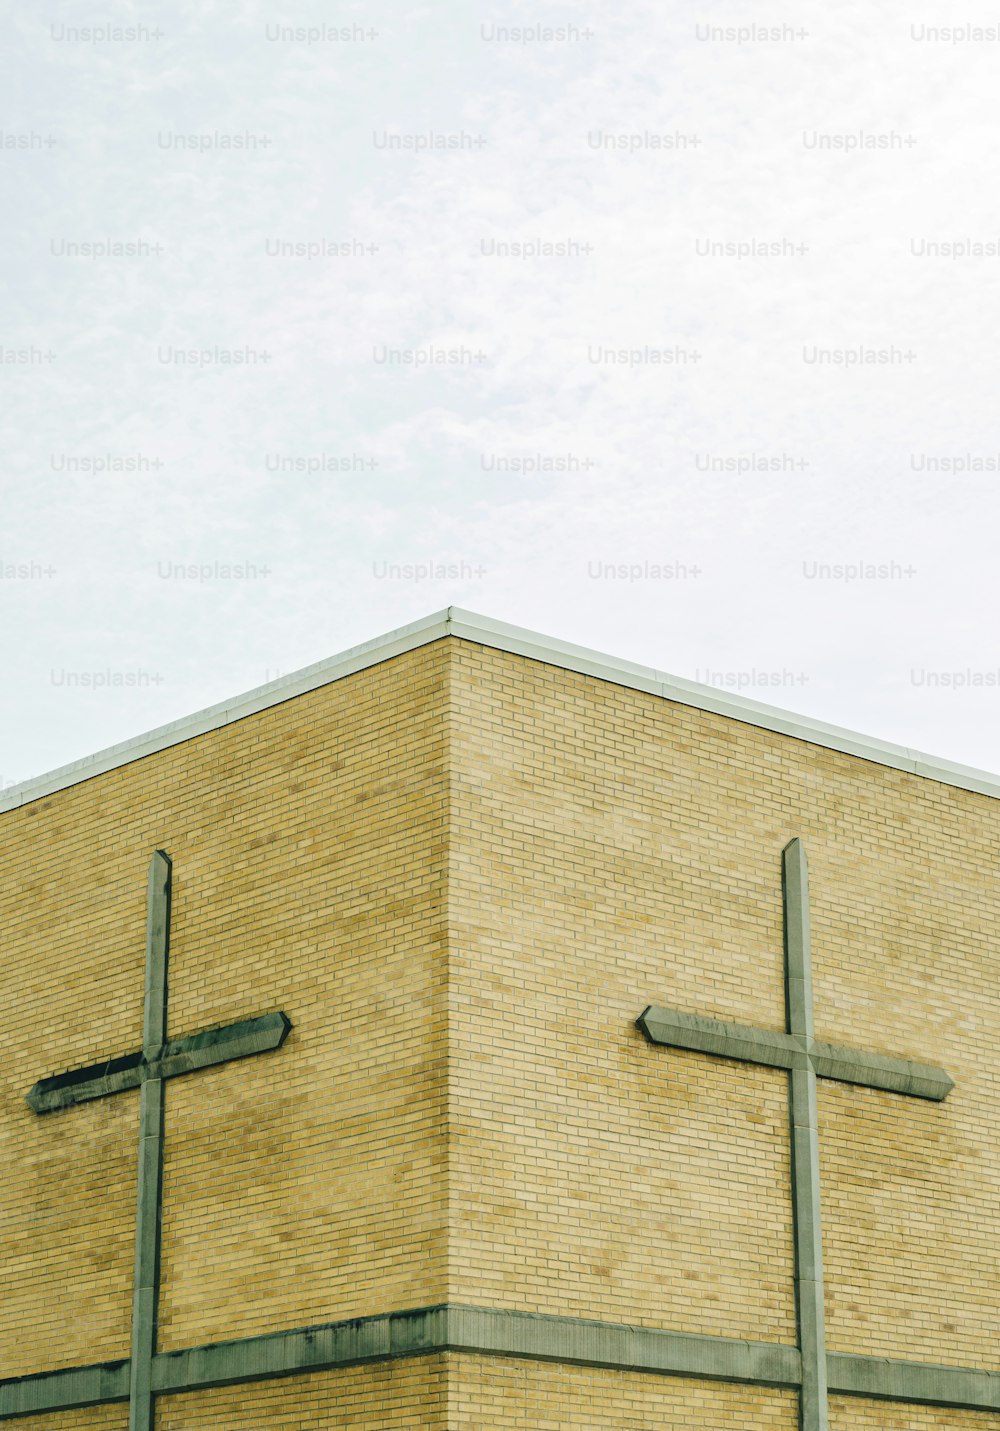 a large brick building with three crosses on it